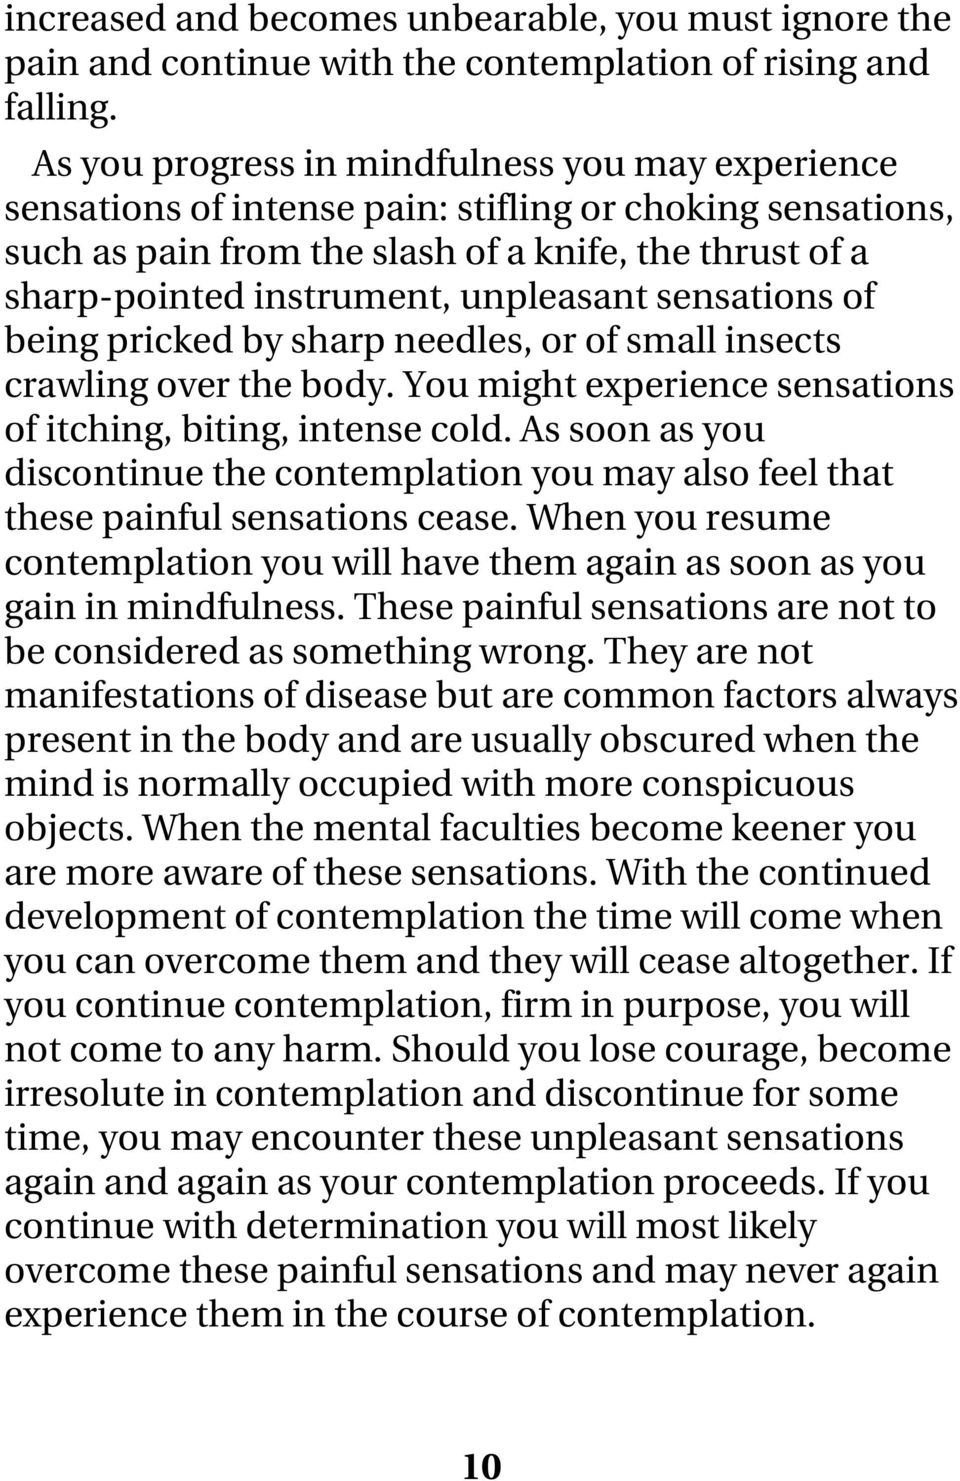 unpleasant sensations of being pricked by sharp needles, or of small insects crawling over the body. You might experience sensations of itching, biting, intense cold.